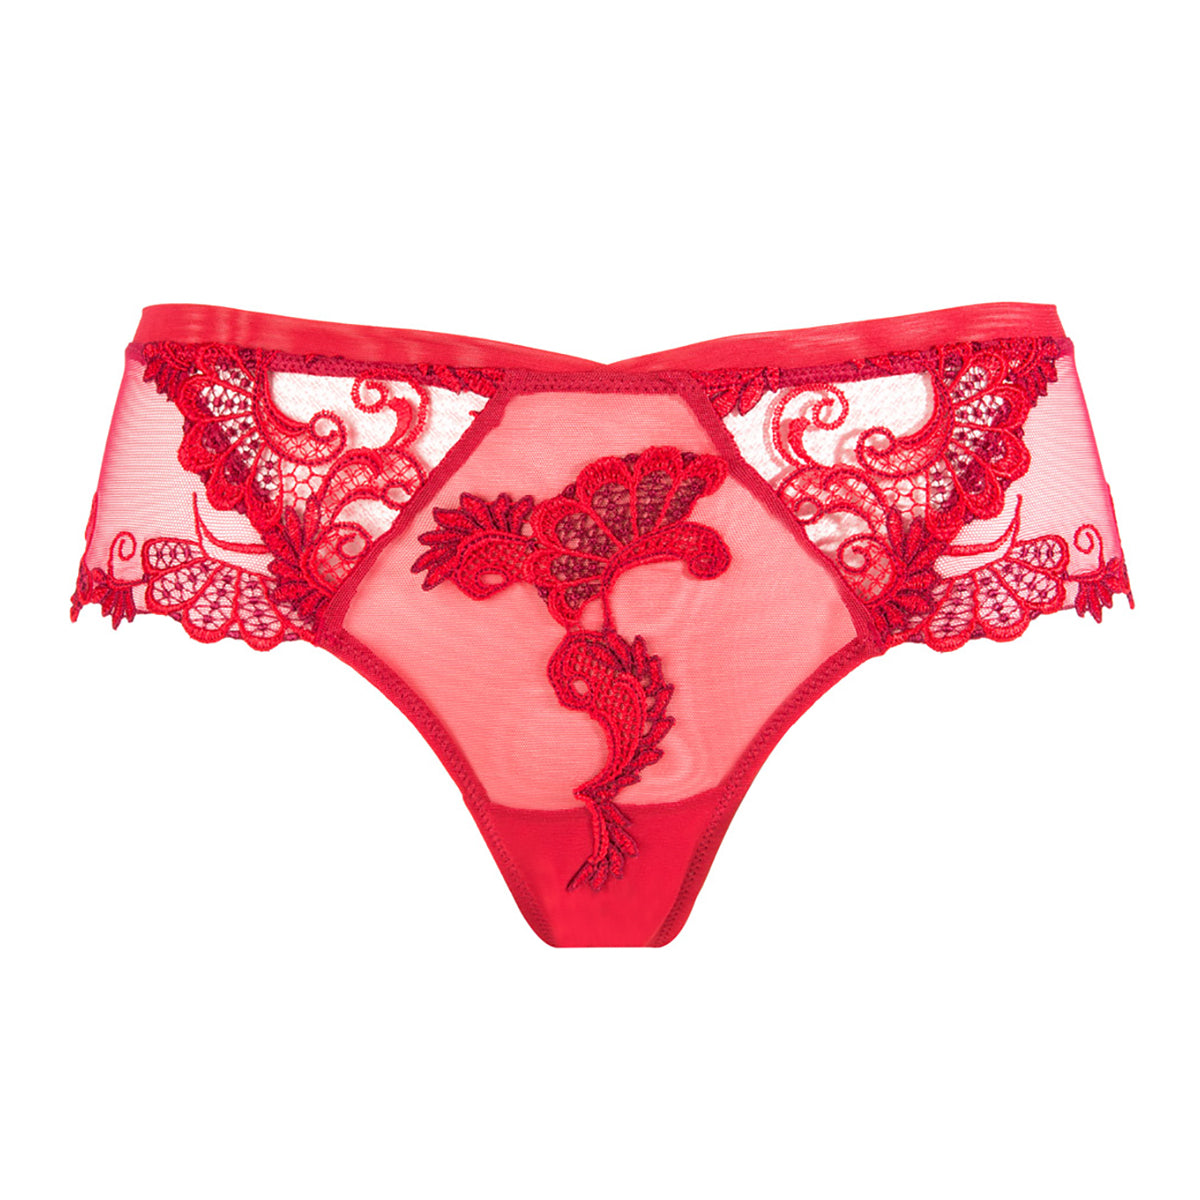 Lise Charmel Dressing Floral Boyleg Brief Front in red